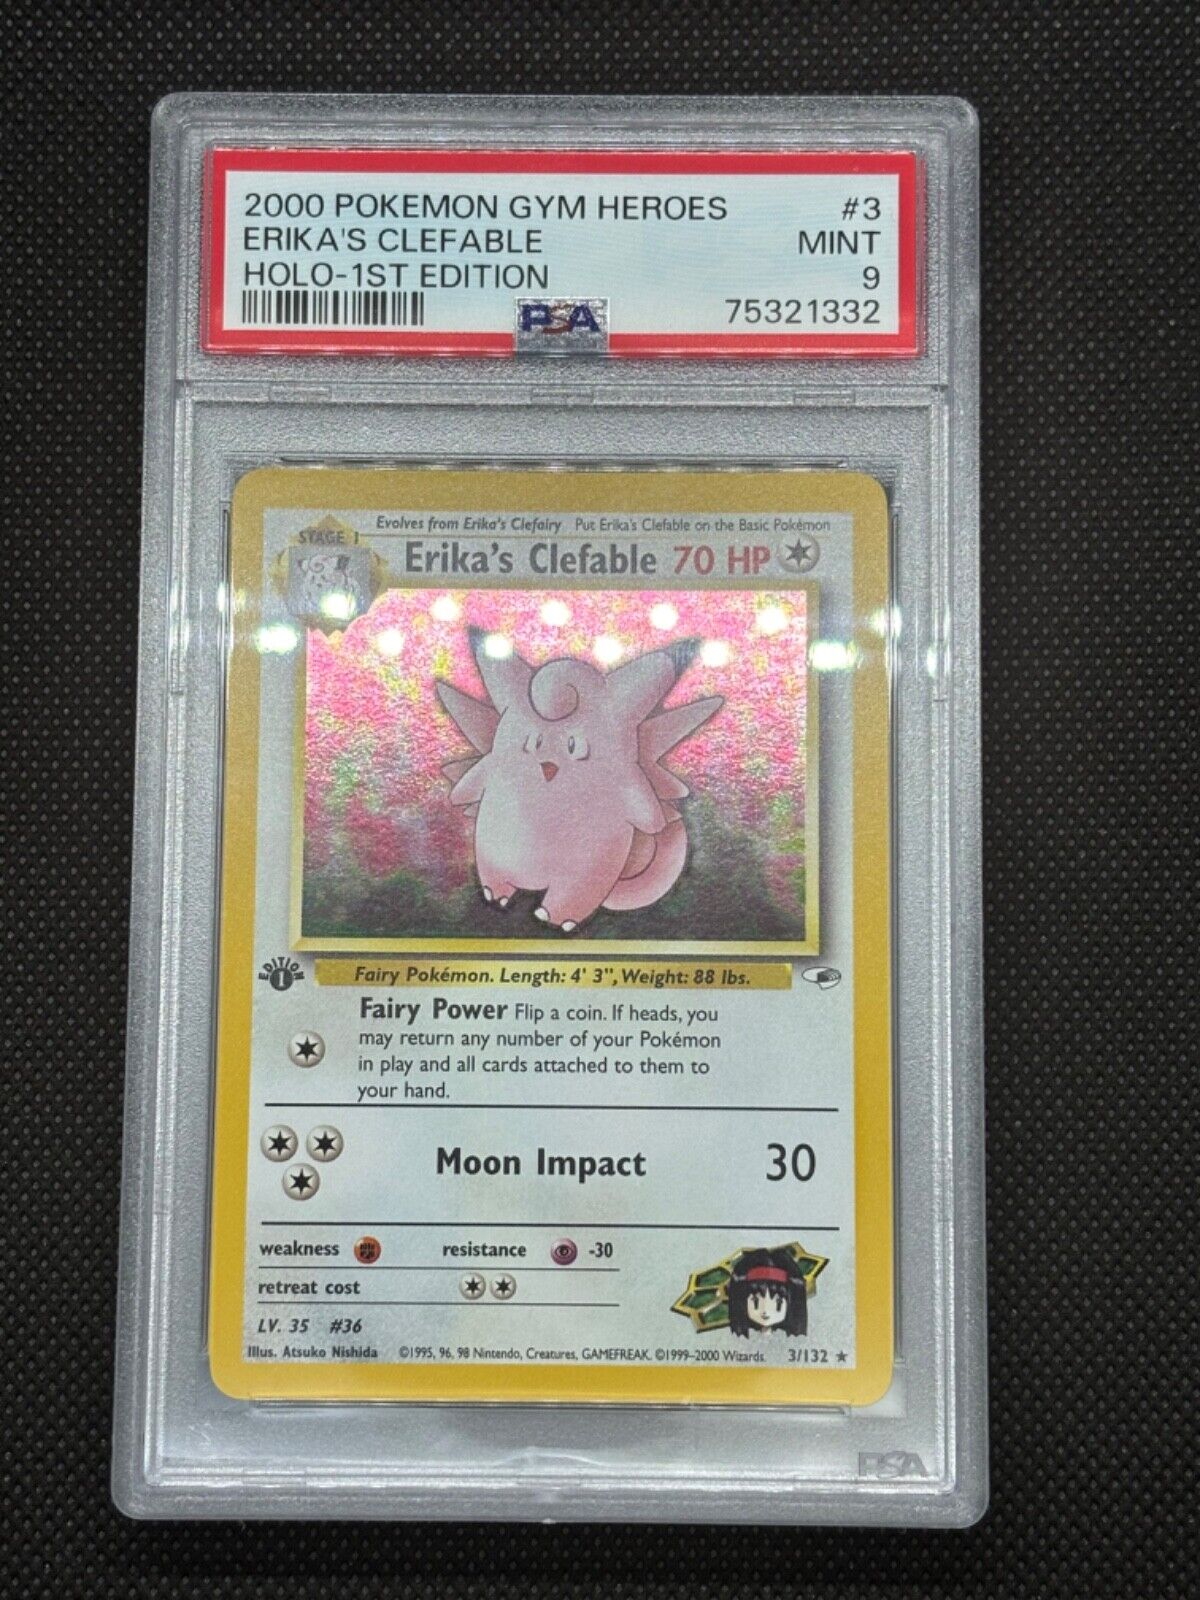 PSA 9 2000 Pokemon Game Gym Heroes Set Erika's Clefable Holo 1st Edition Card #3